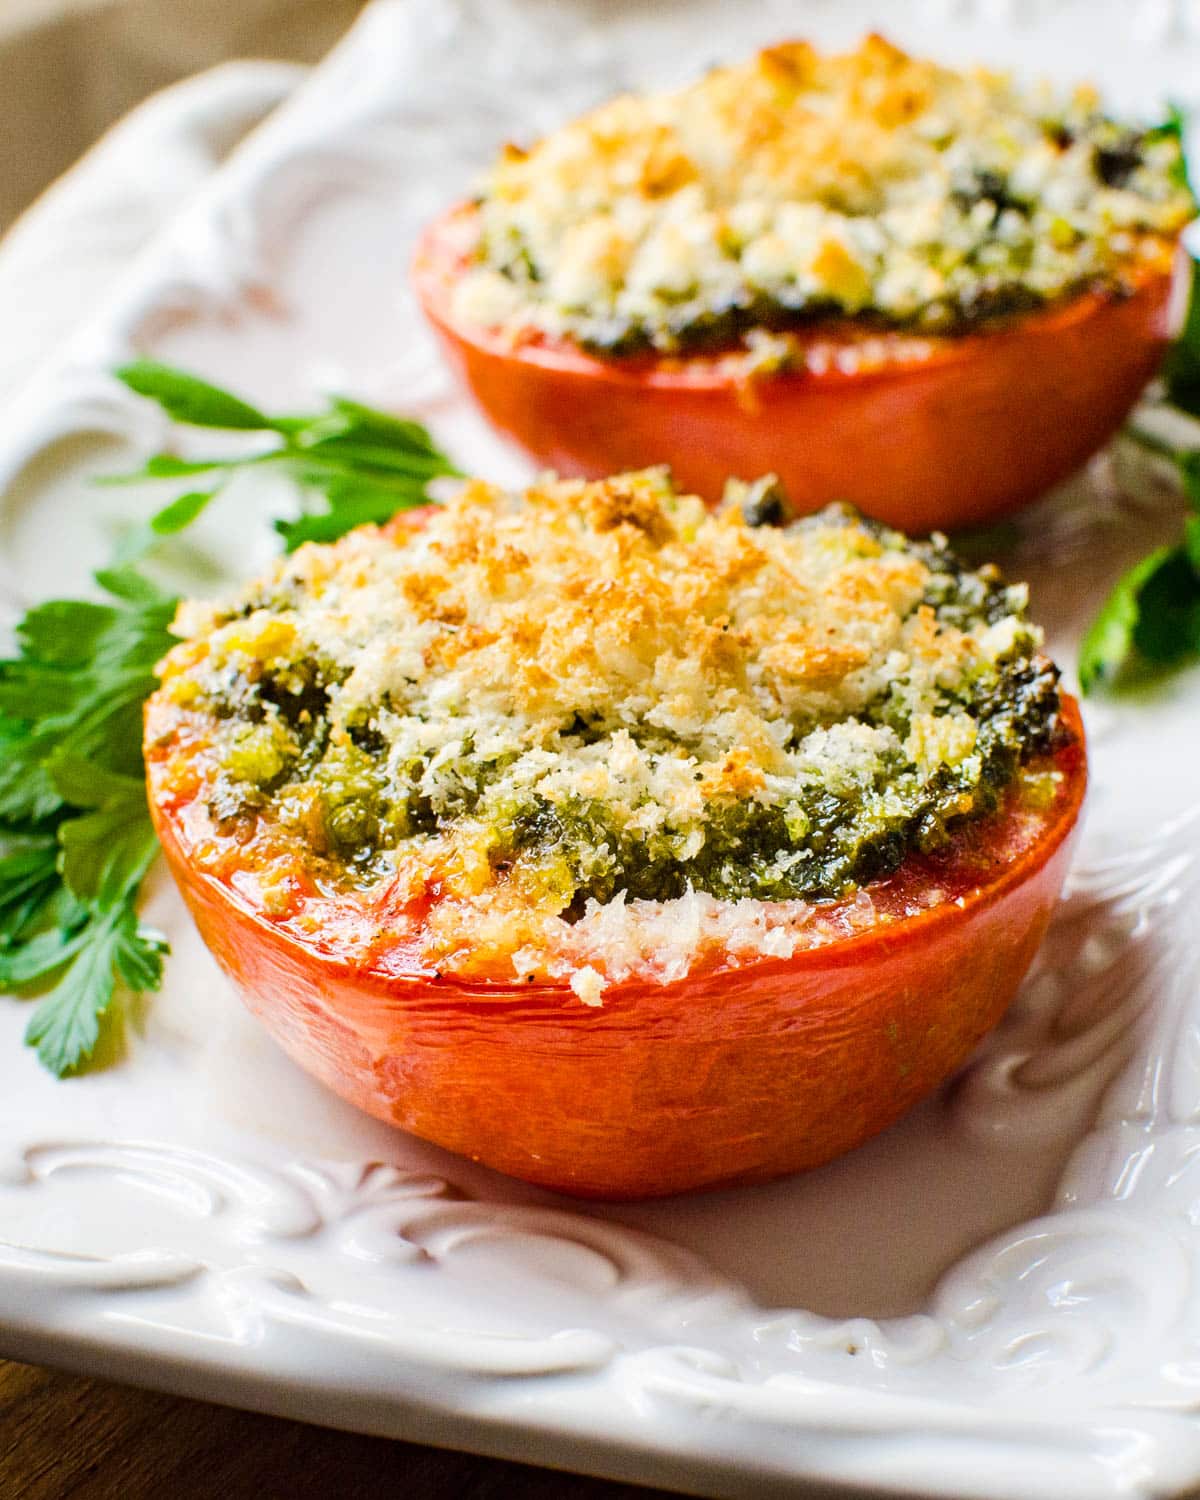 Roasted tomatoes with pesto and breadcrumbs.